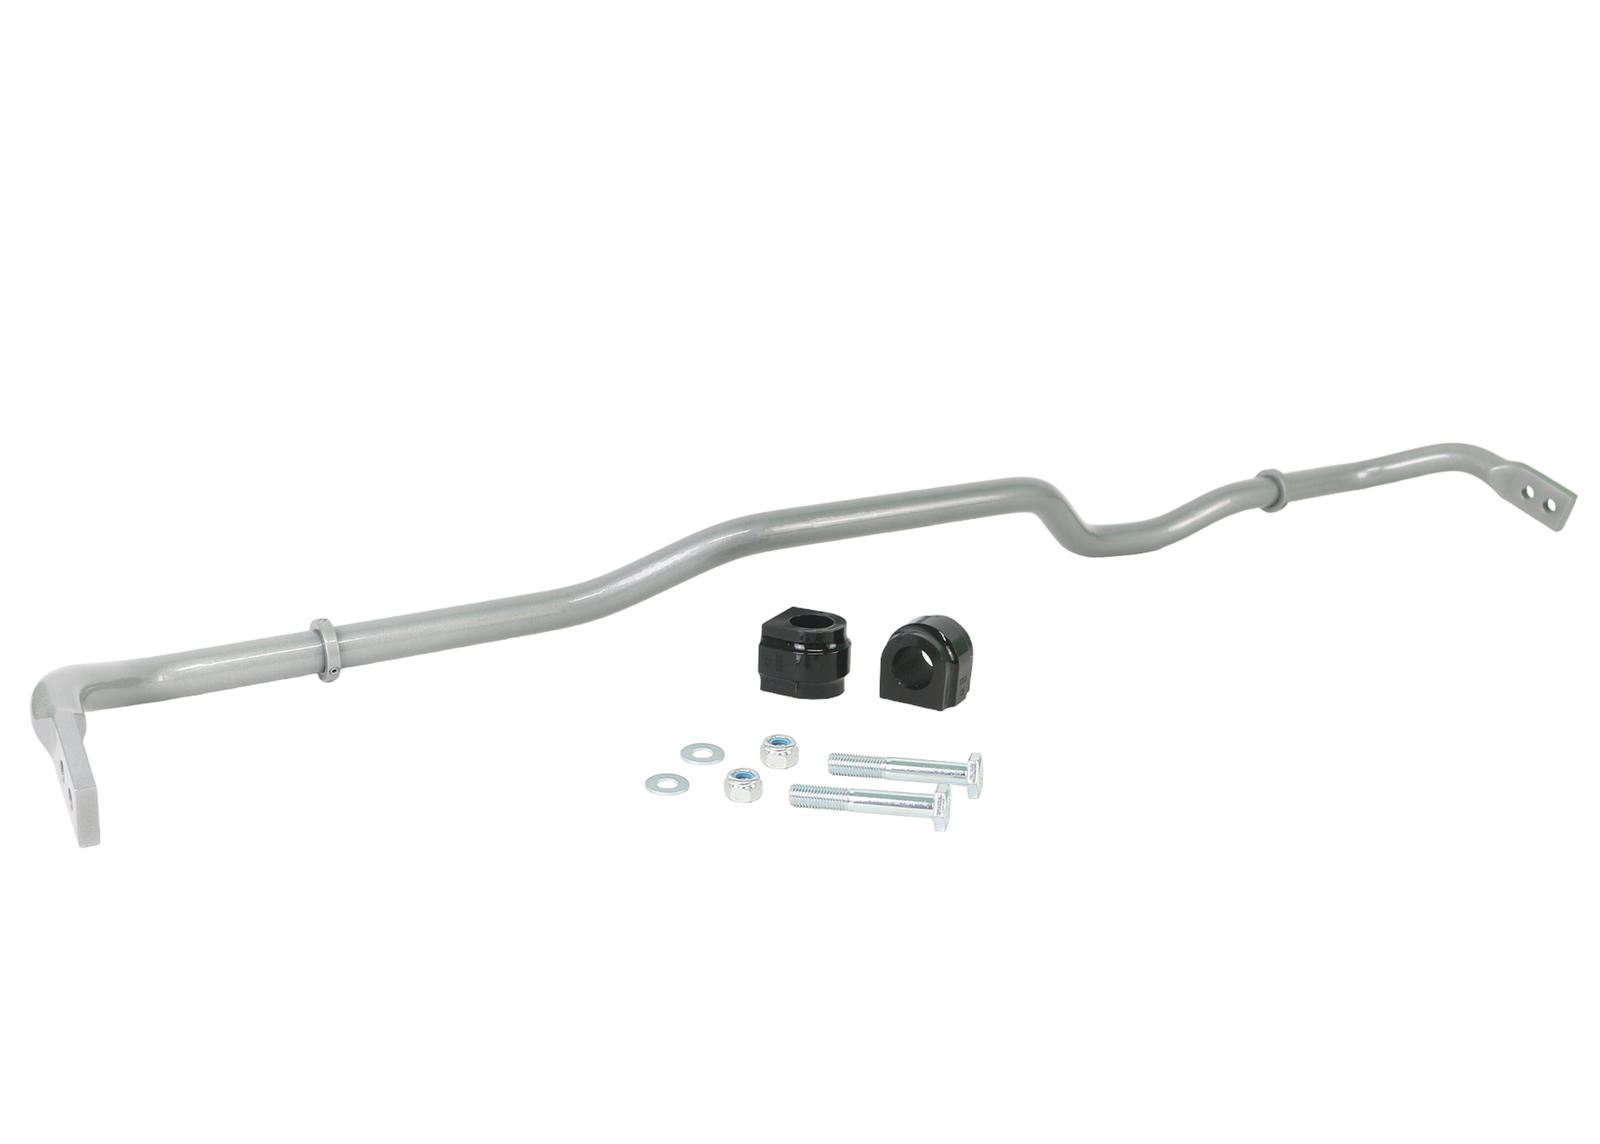 Rear Sway Bar - 24mm 2 Point Adjustable to Suit Audi, Seat, Skoda and Volkswagen PQ35 Awd